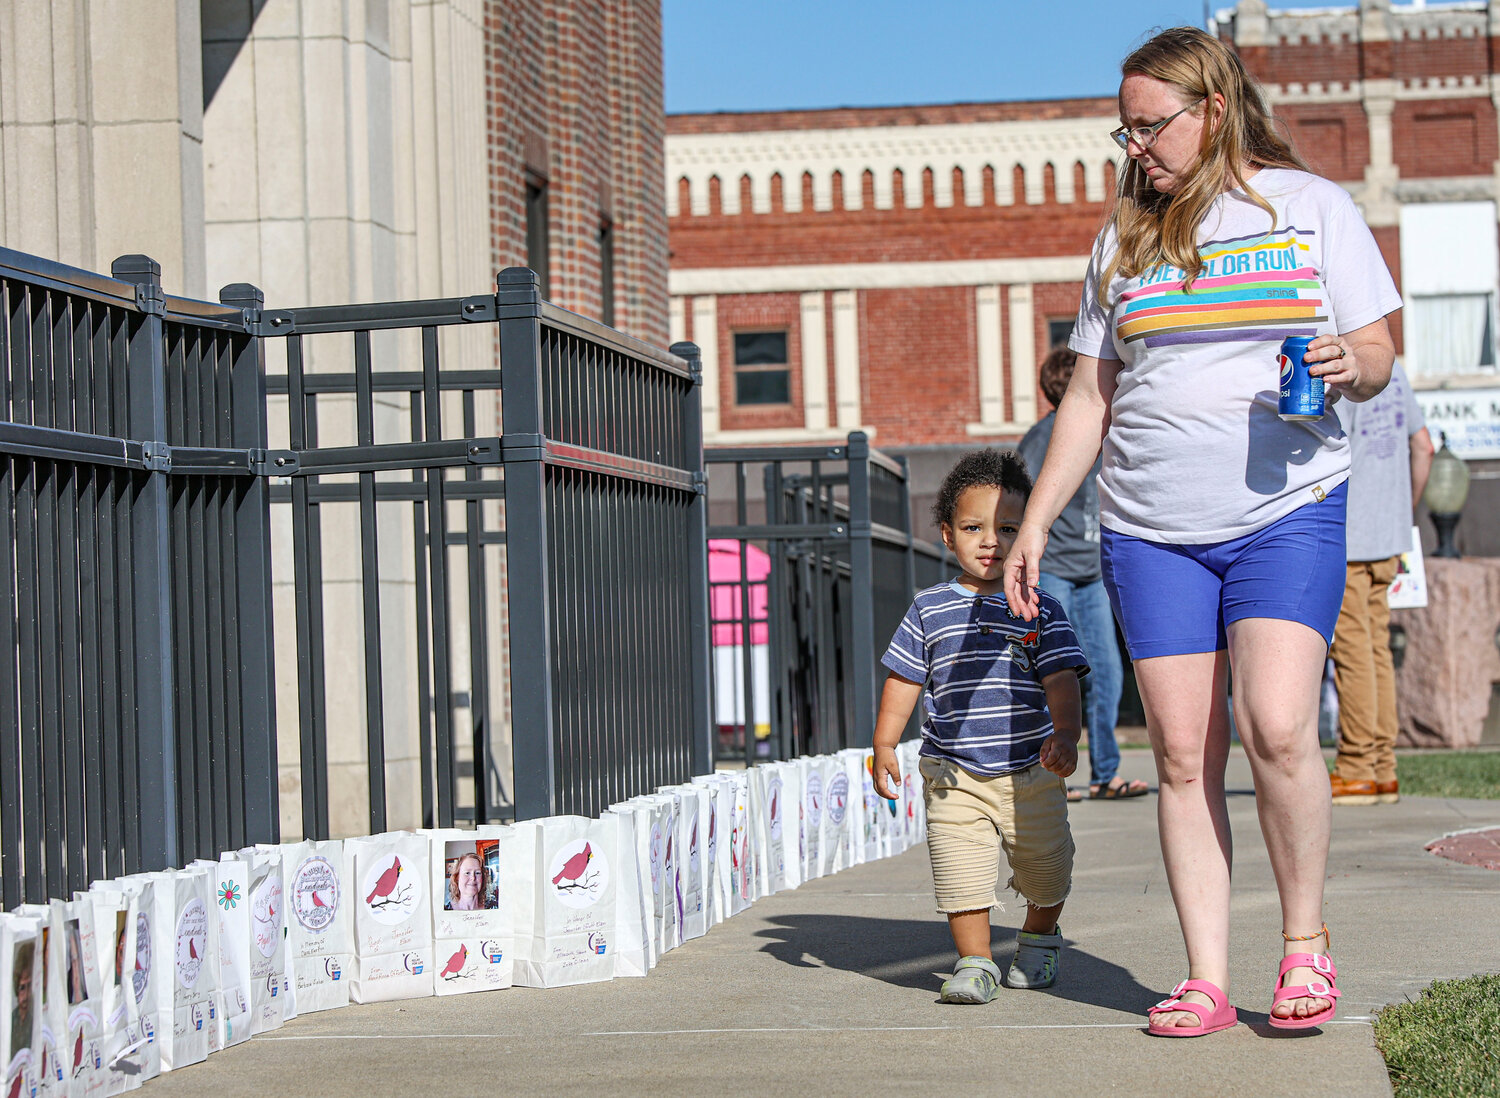 Beth Culwell and her son Audric Shields walked along the remembrances left of those who have passed from cancer at the Relay For Life event on Saturday, Sept. 9, at the Audrain County Courthouse. Culwell and Shields were there to honor Culwell’s mother, Barbara Gregory, who is a survivor.